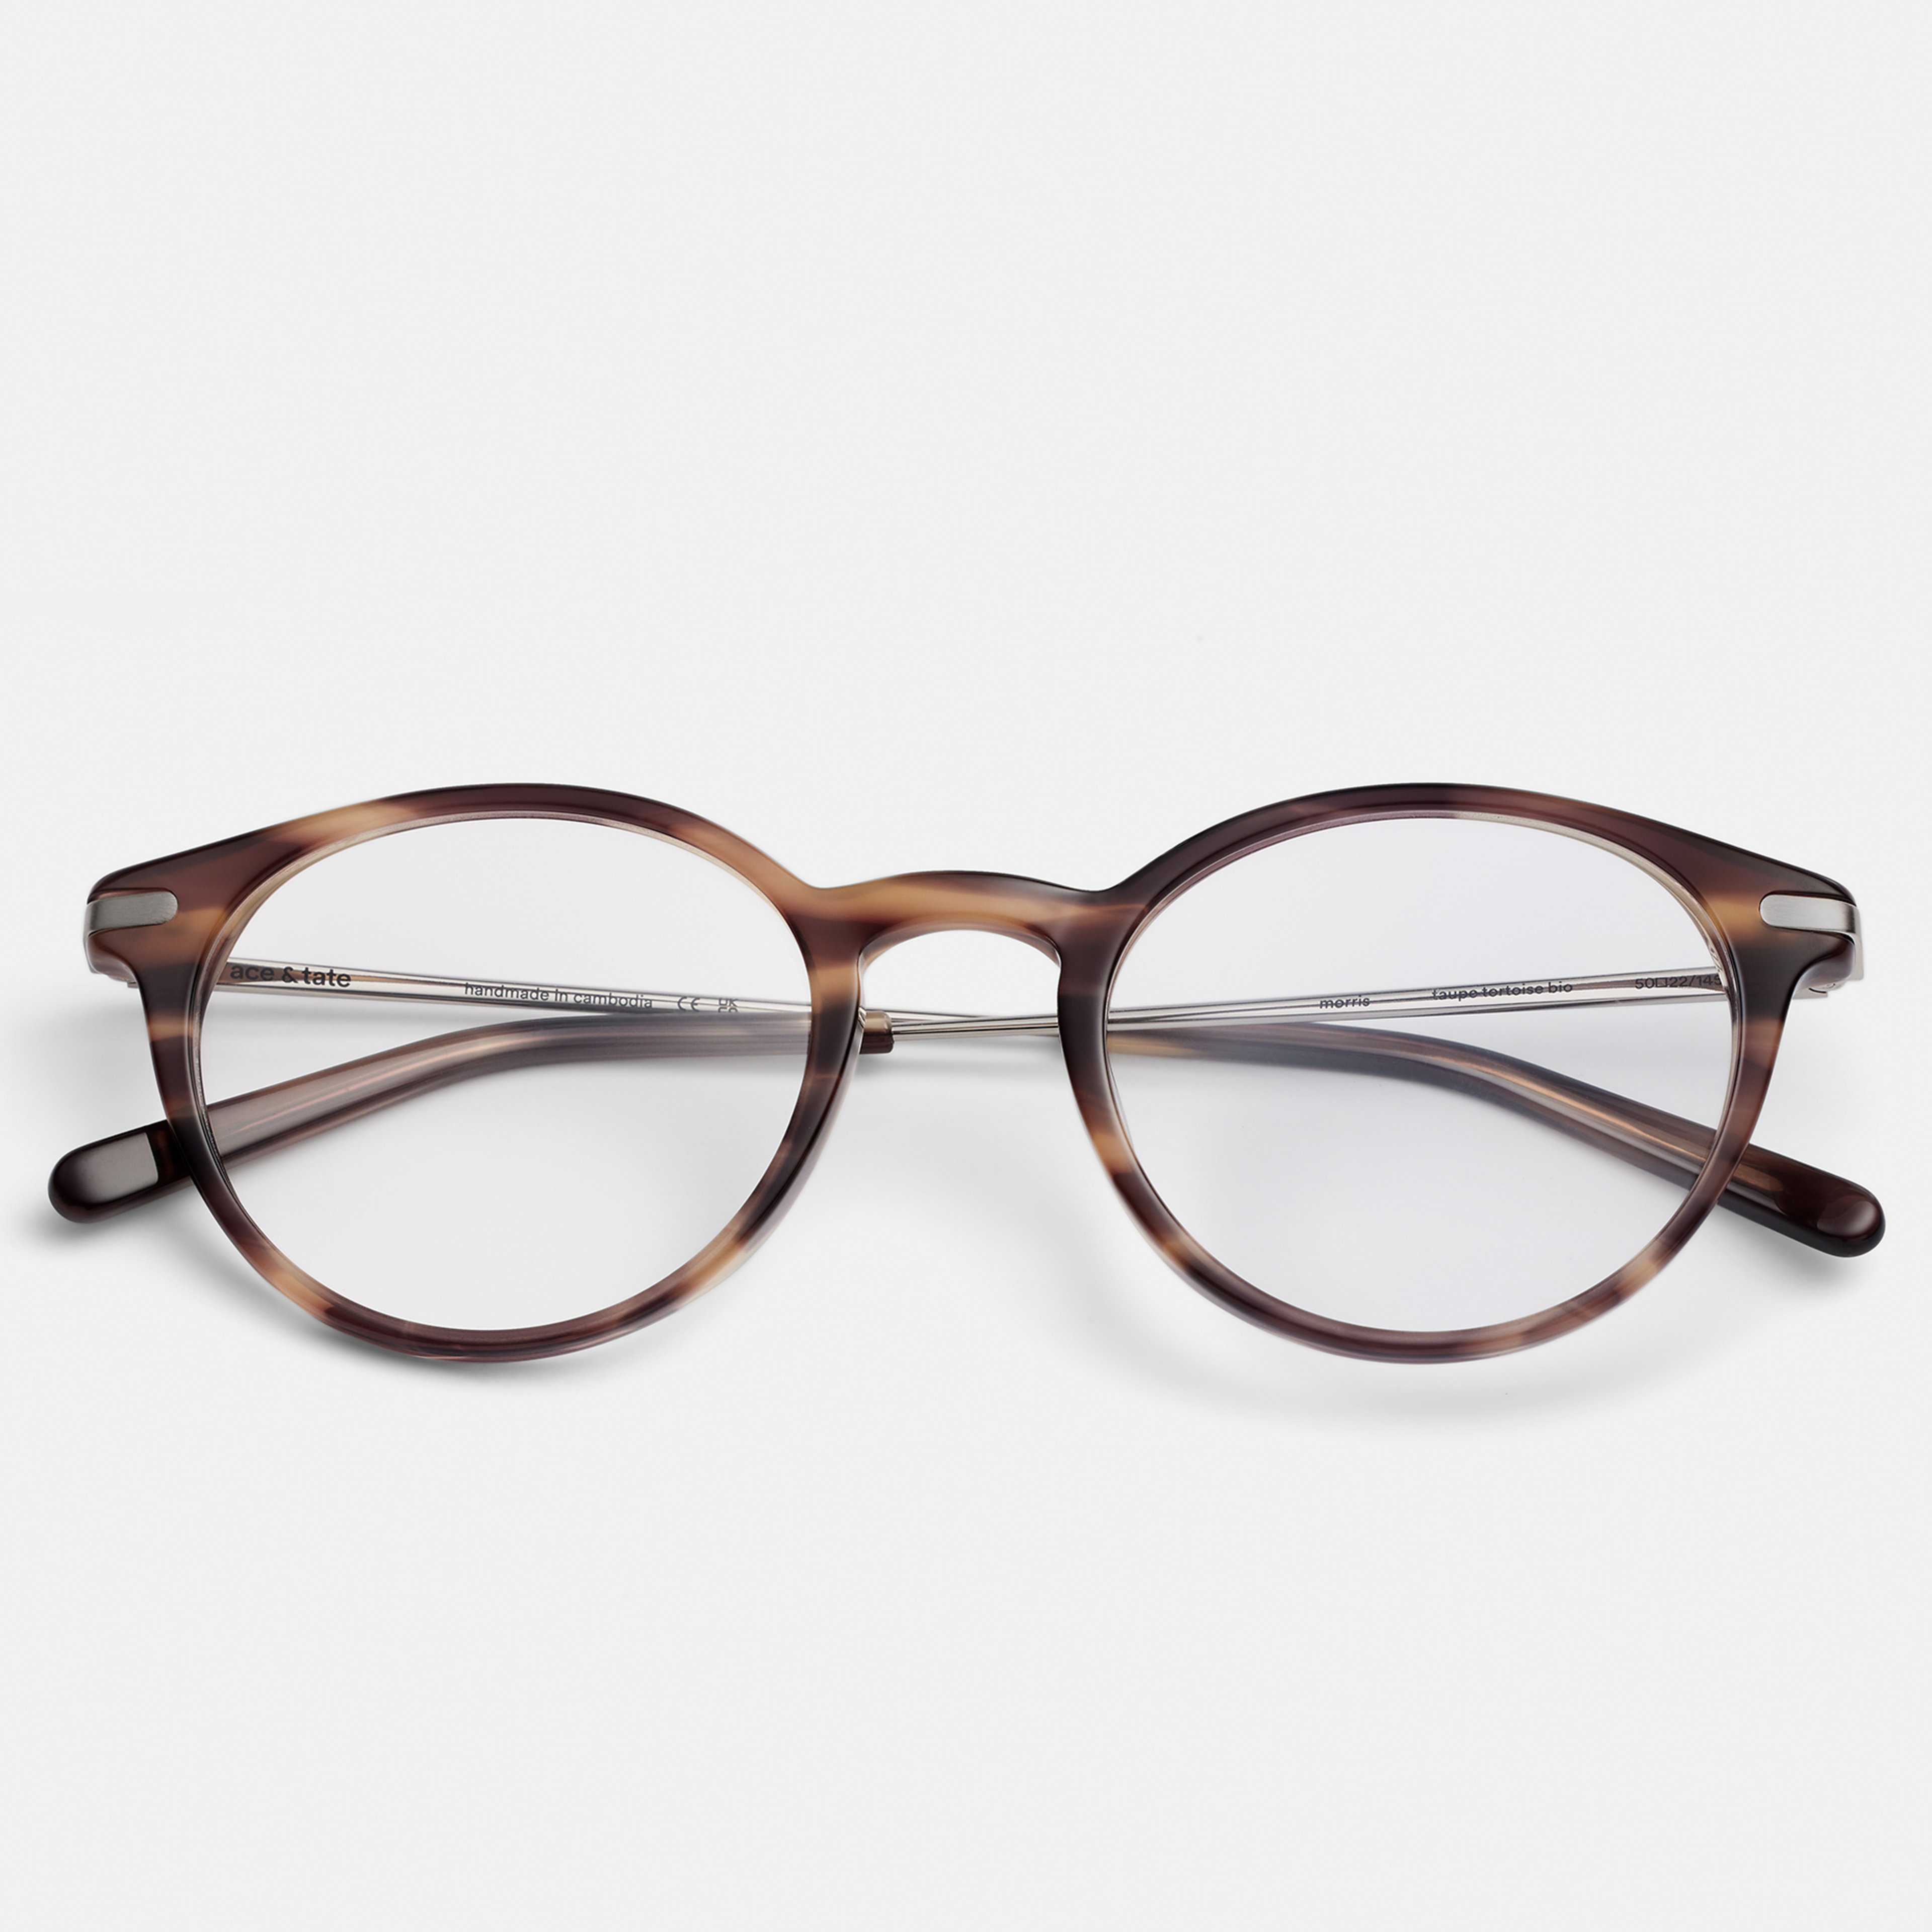 Ace & Tate Glasses | Round Acetate in Beige, Brown